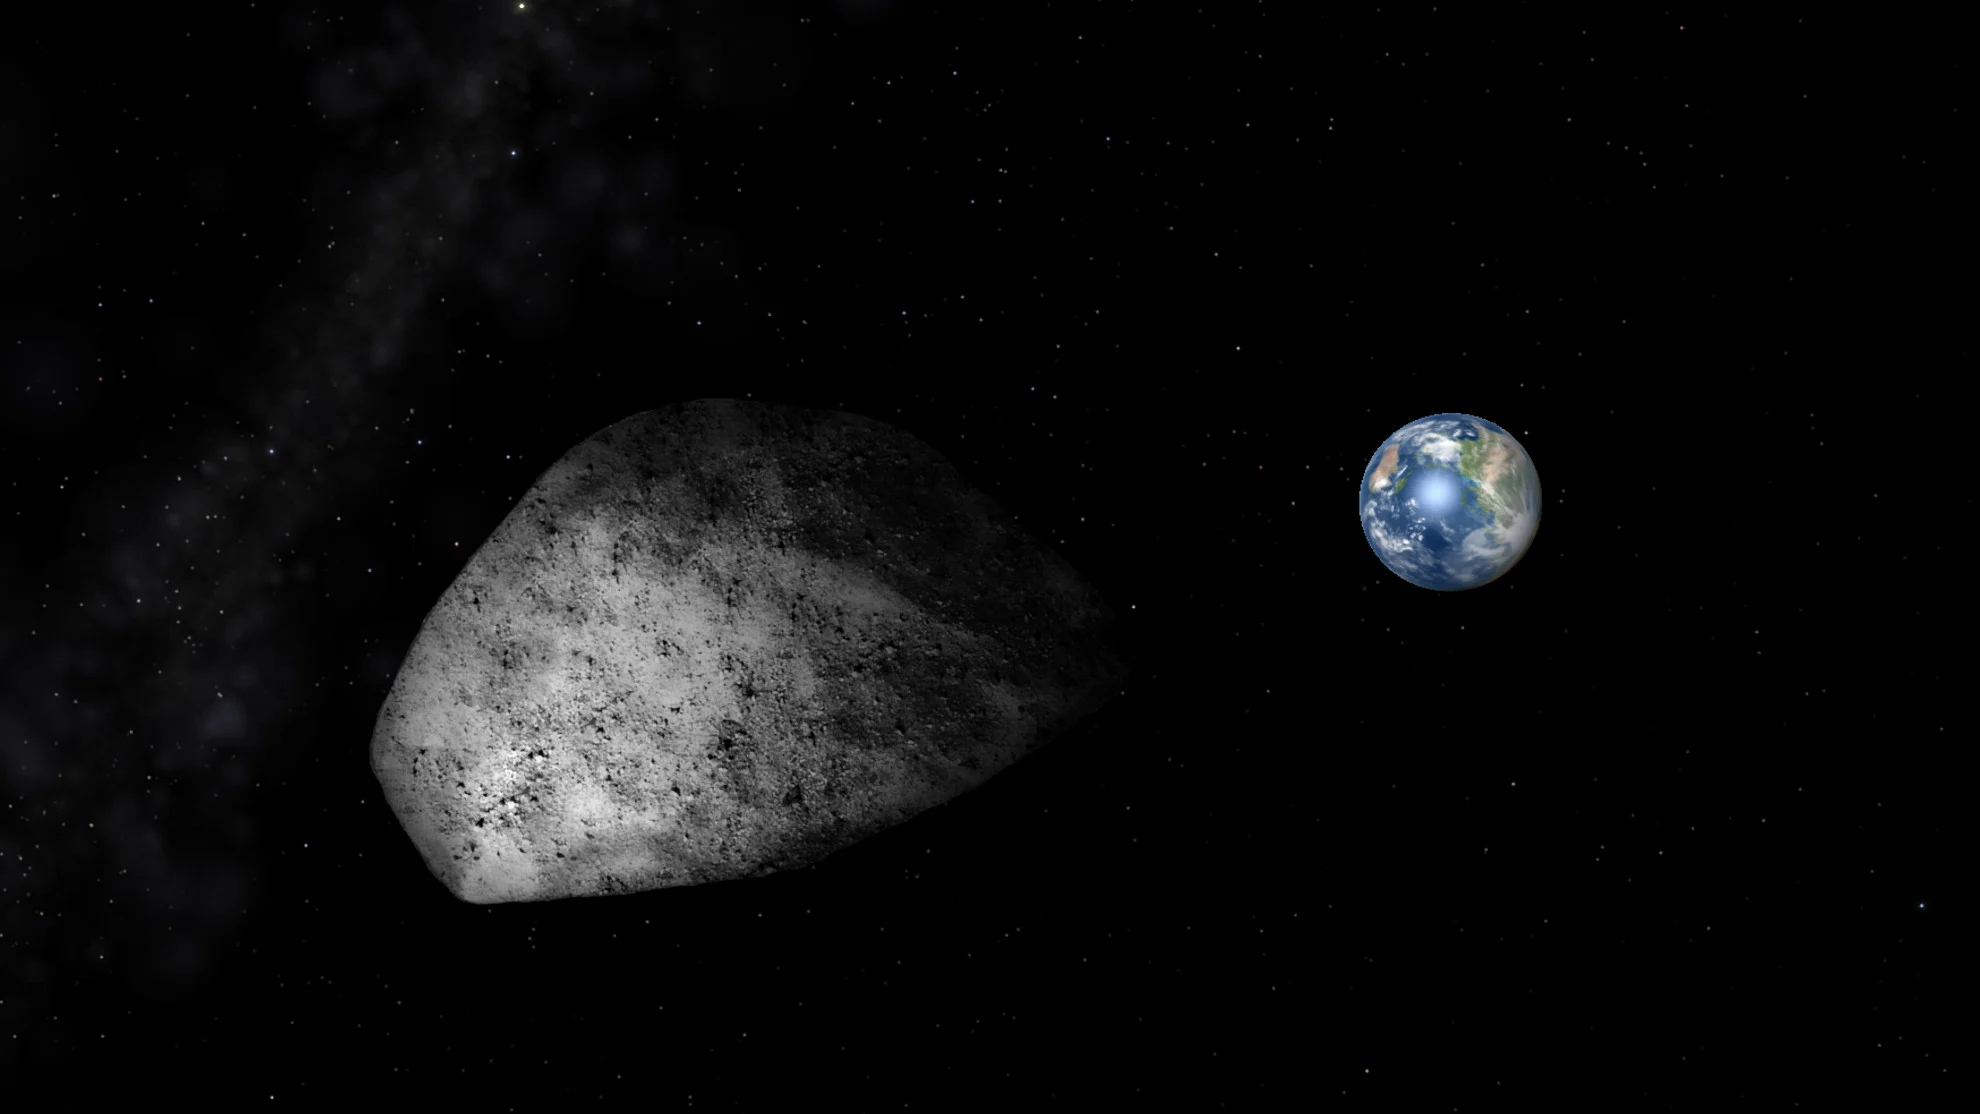 Could a collision cause asteroid Apophis to hit Earth? New study says no